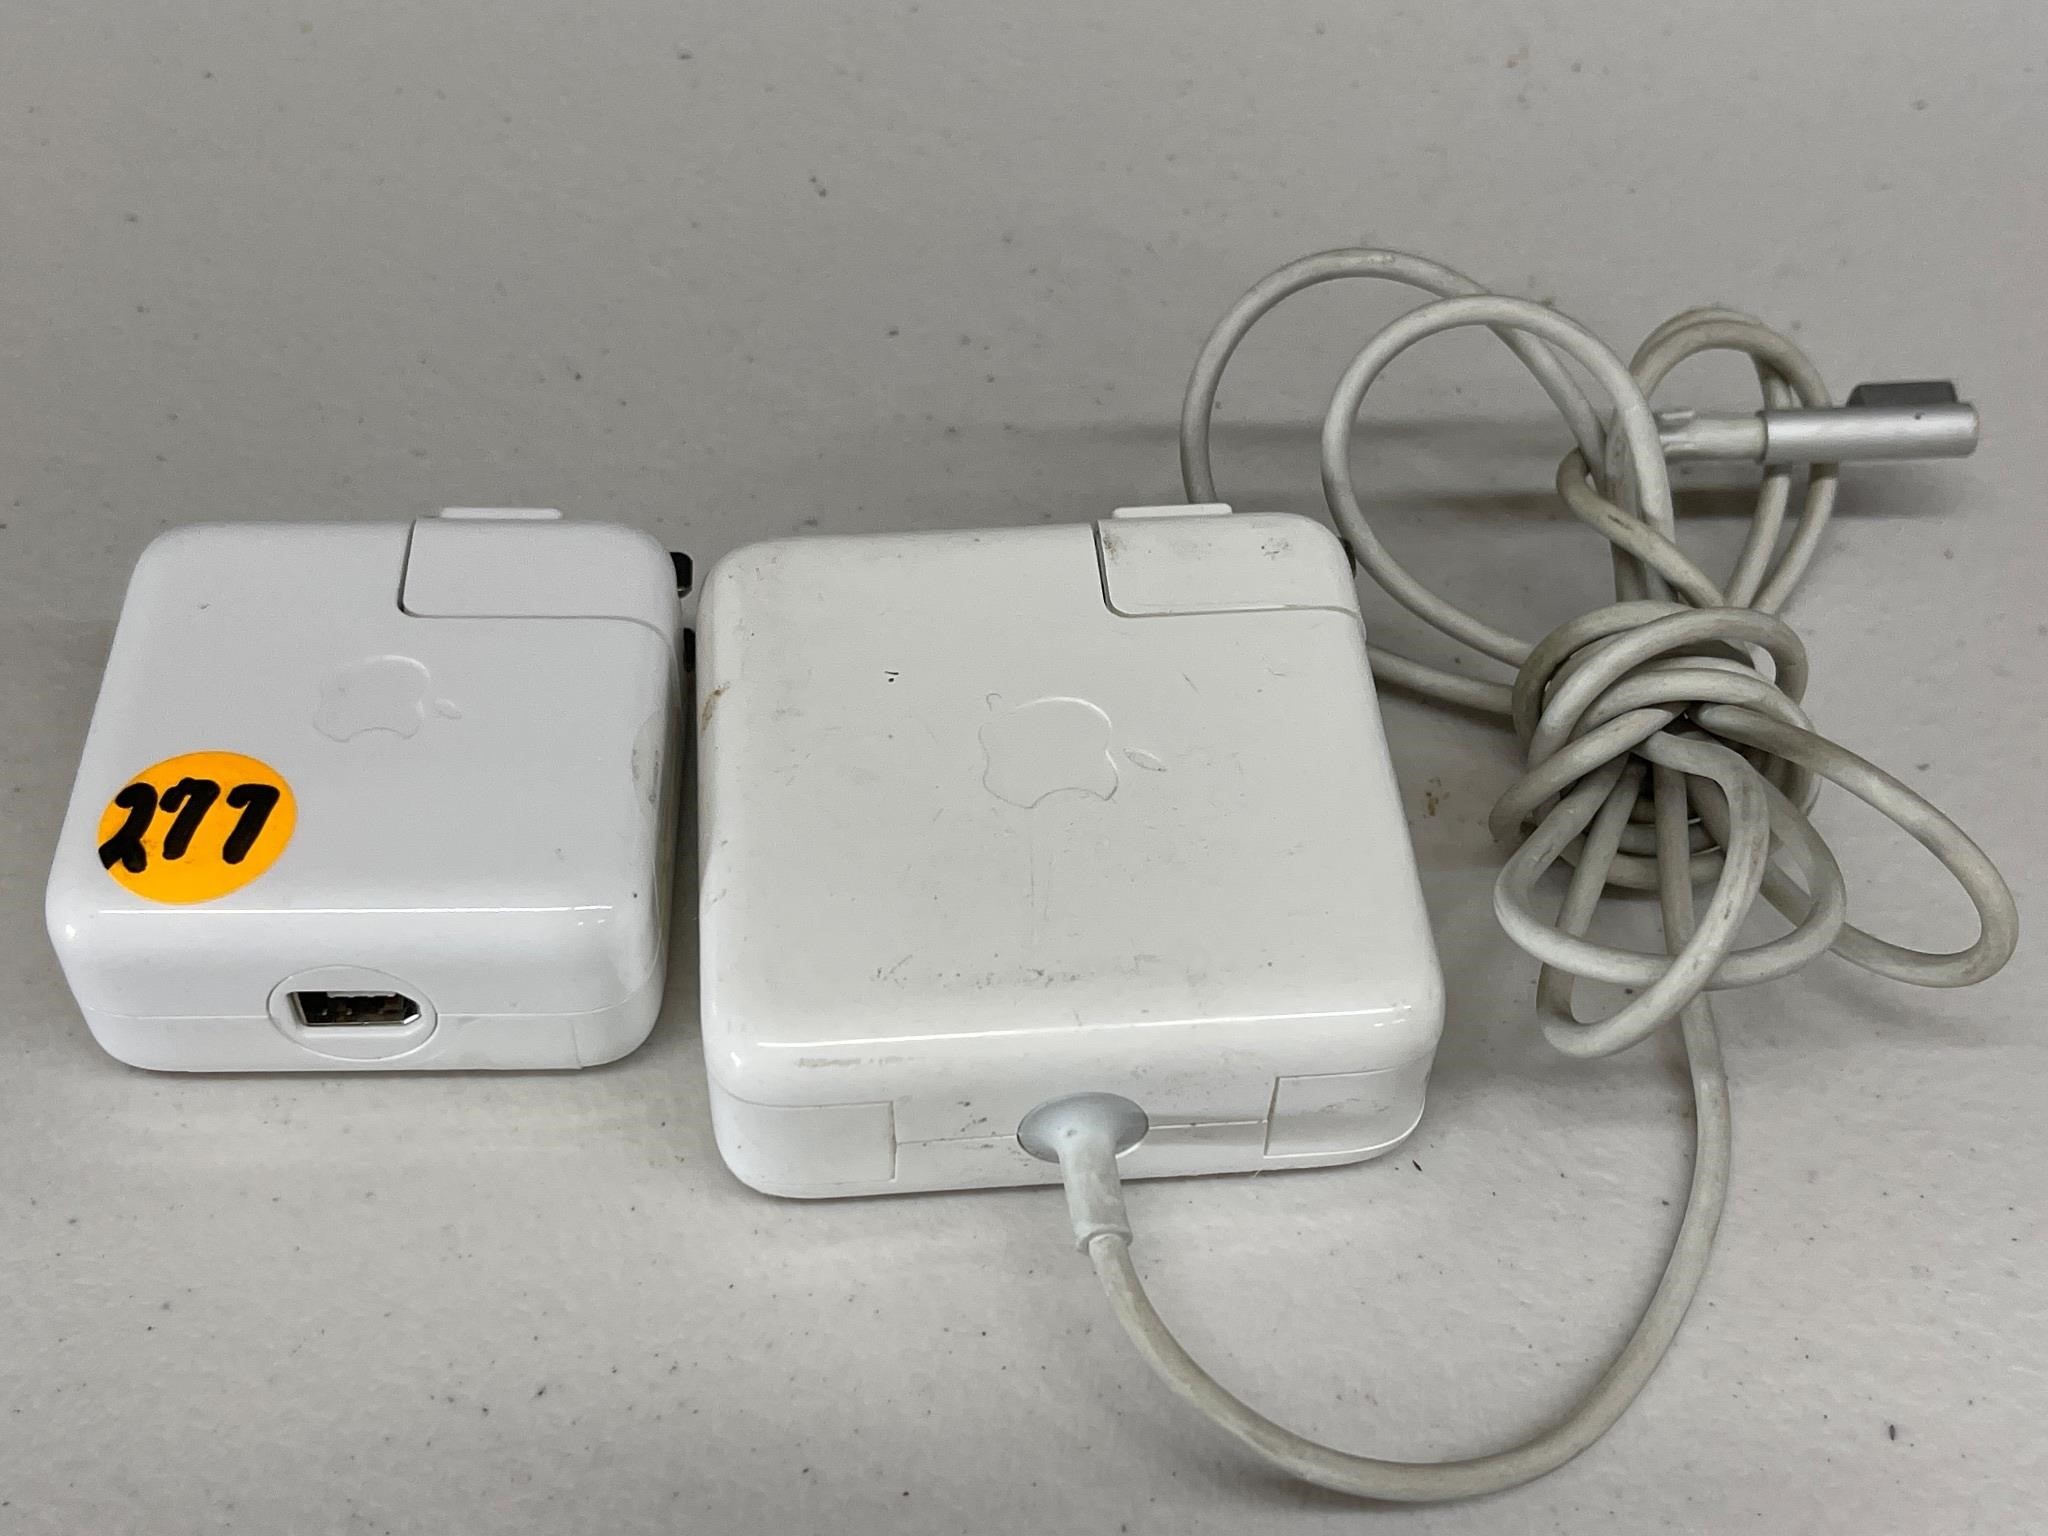 APPLE MACBOOK & IPHONE CHARGERS